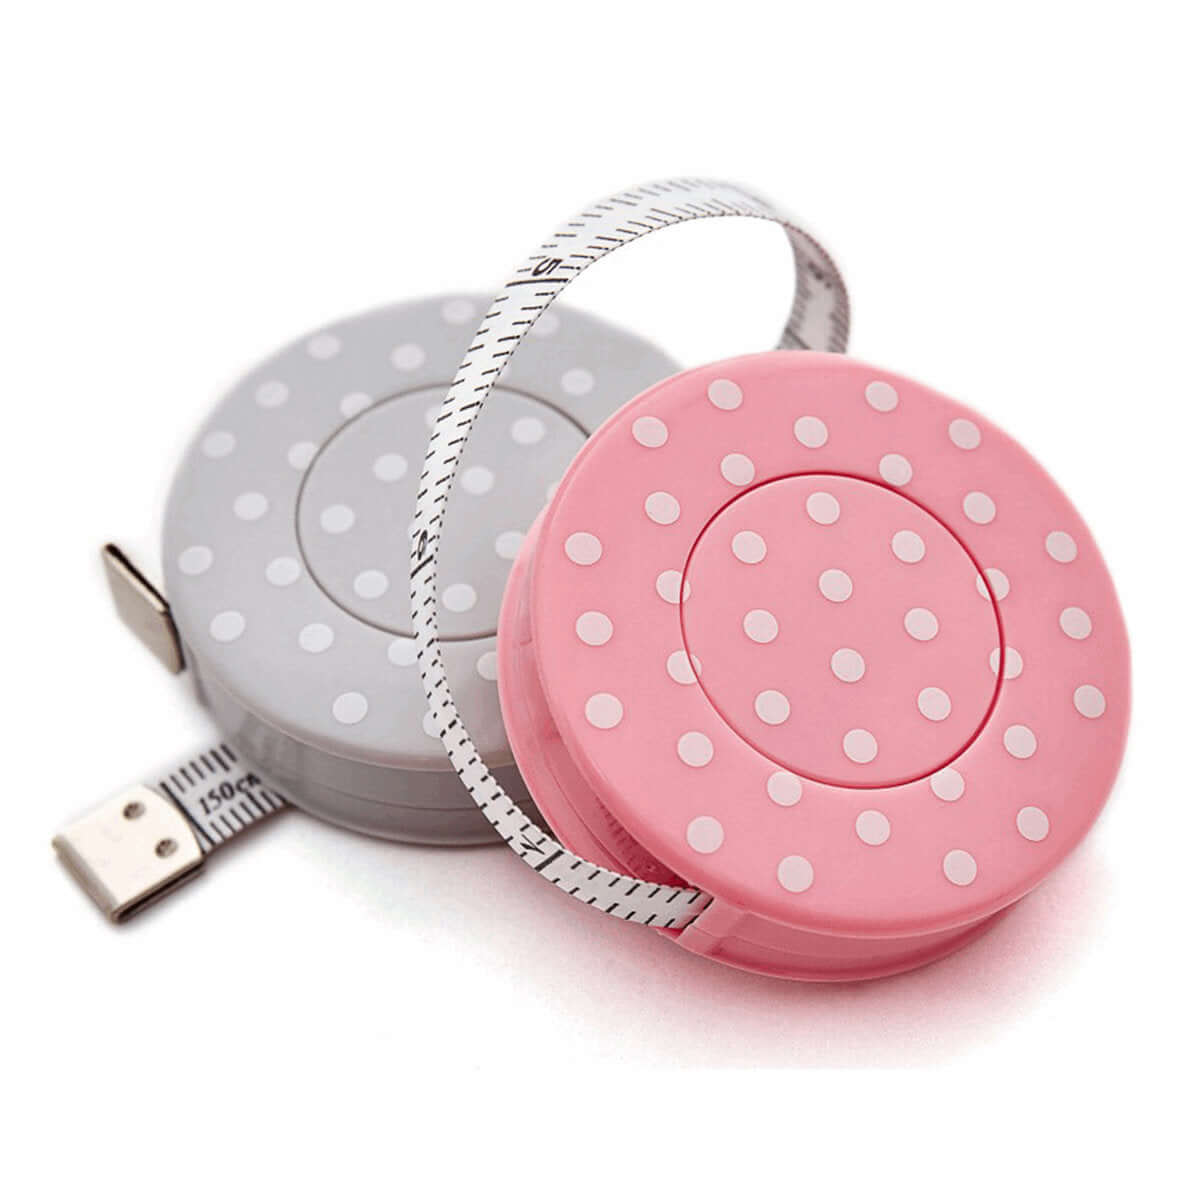 Retractable Tape Measure: Pink/grey polkadot/spot/dotty. Sewing and crafts. 150 cm long. Metric and imperial.